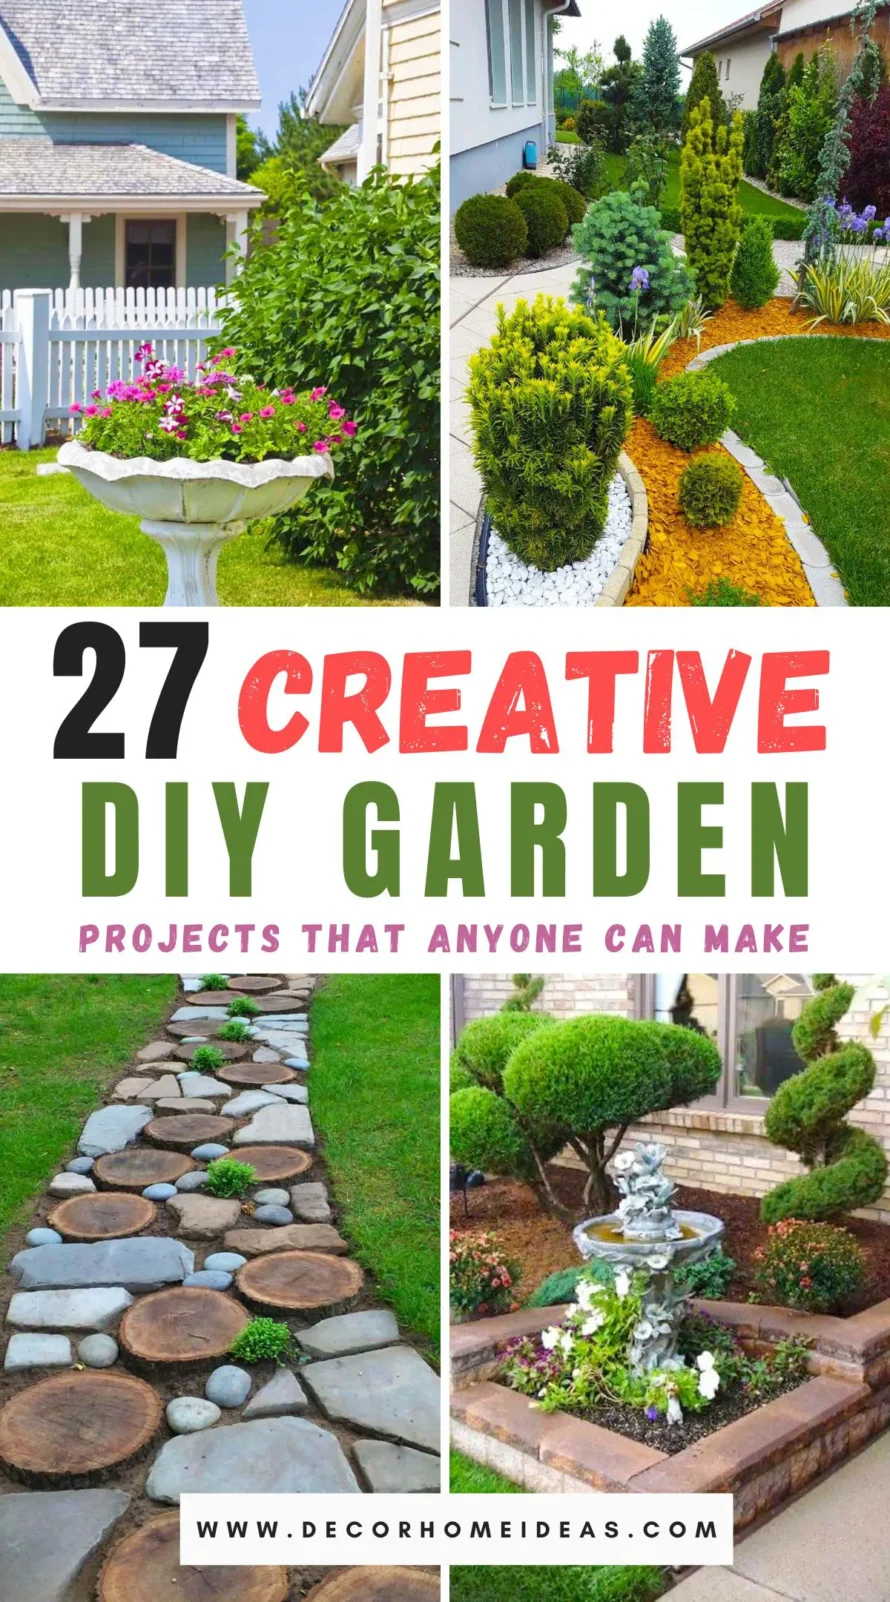 Discover 27 easy DIY garden projects that anyone can tackle, regardless of skill level. From simple planters to beautiful birdbaths, these ideas will enhance your outdoor space and bring your gardening dreams to life. Get ready to get your hands dirty and create something wonderful!